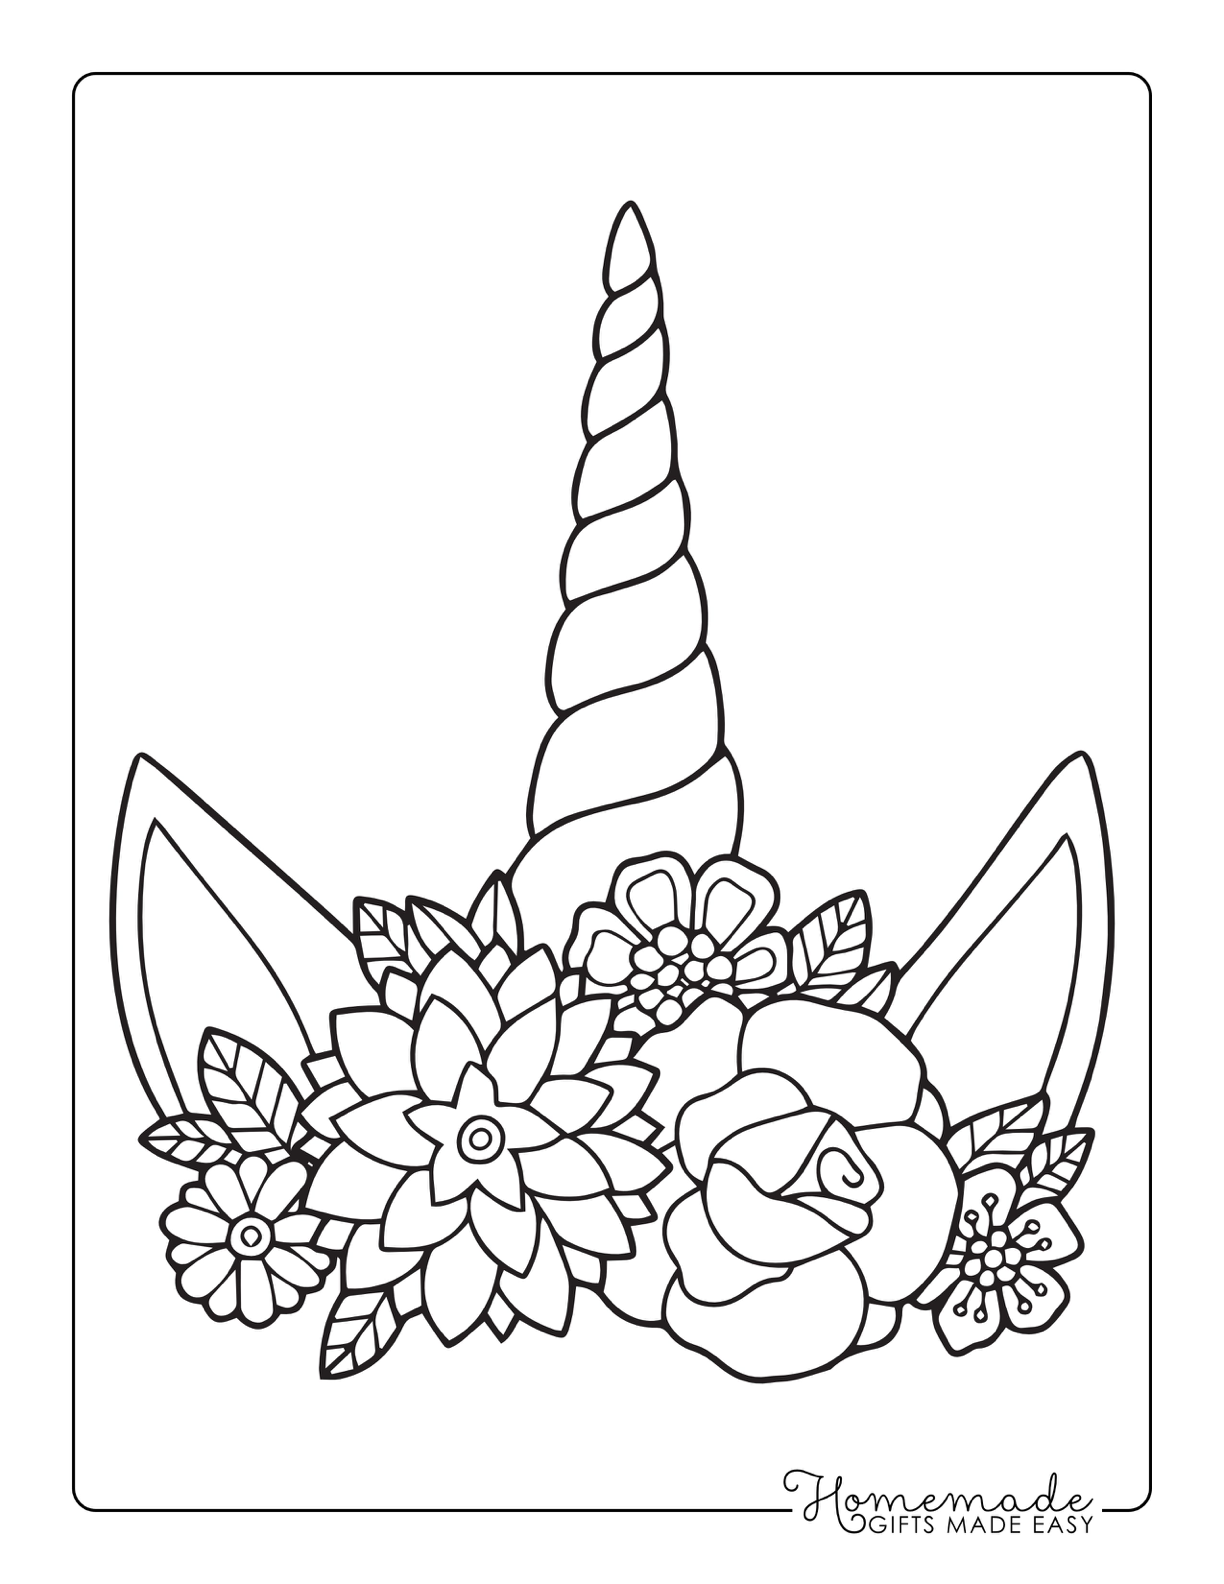 11 Best Unicorn Coloring Pages - Motherly